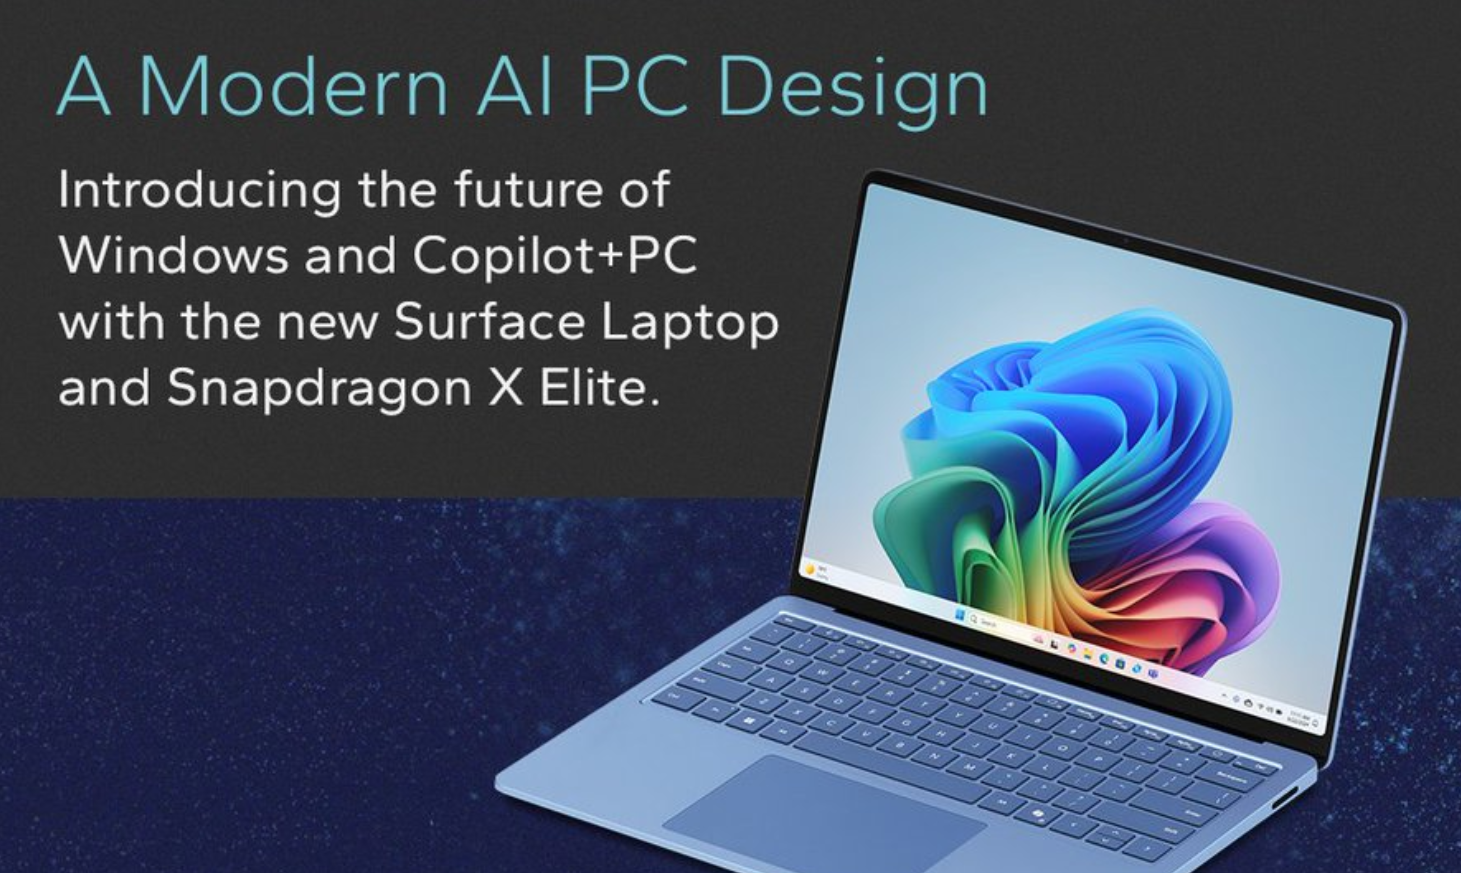 Microsoft's new Copilot+ PC smoked Apple's MacBook M3 in performance and battery life